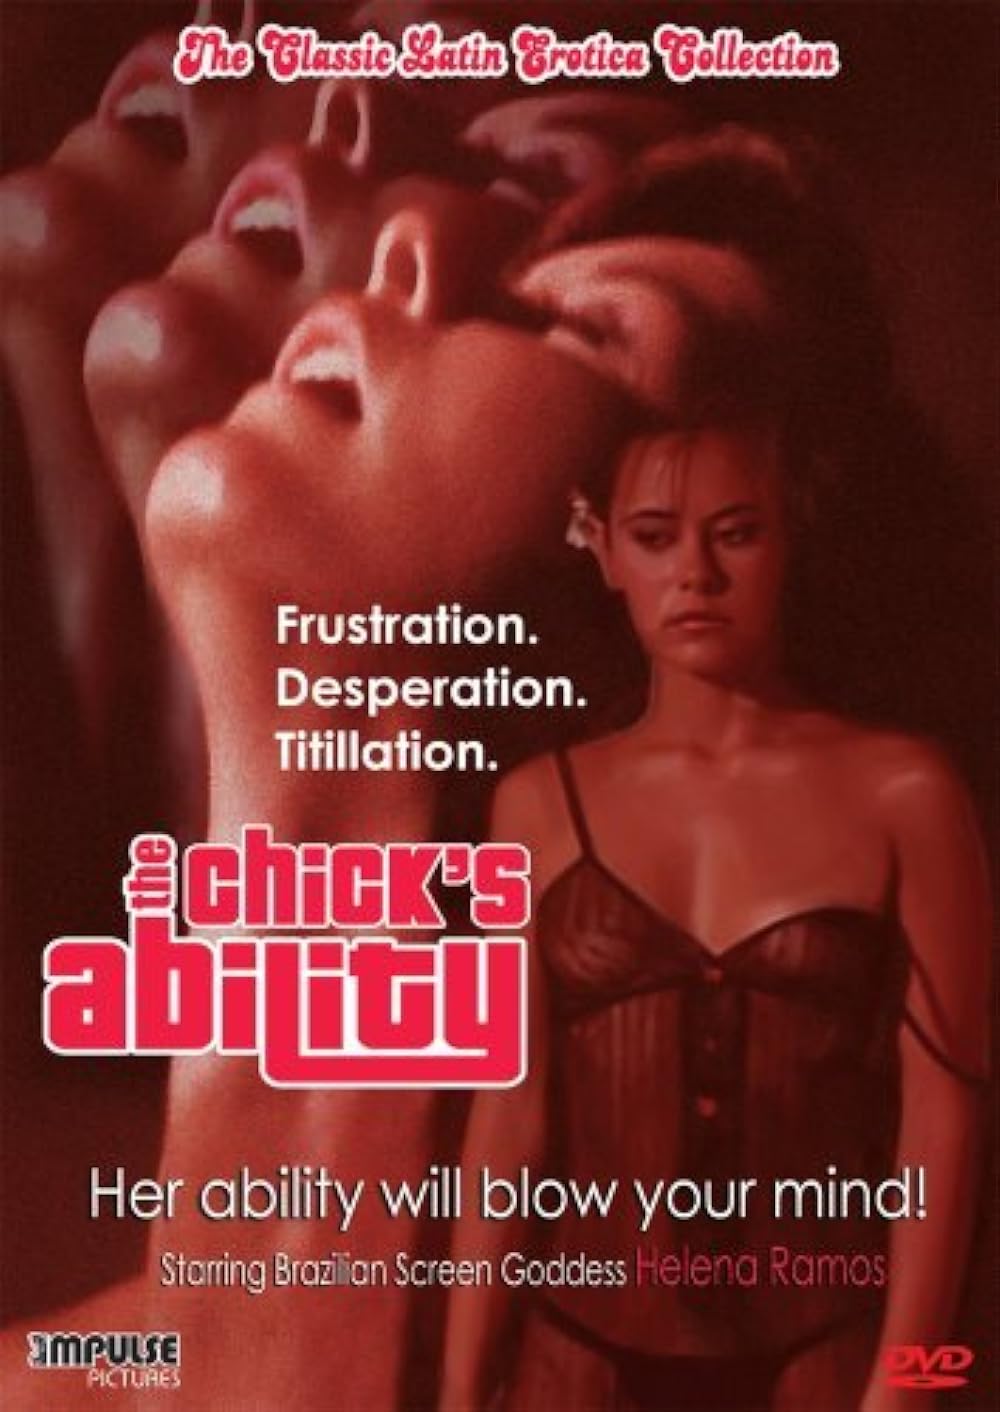 18+The Chick’s Ability 1984 Portuguese 480p HDRip 300MB Download